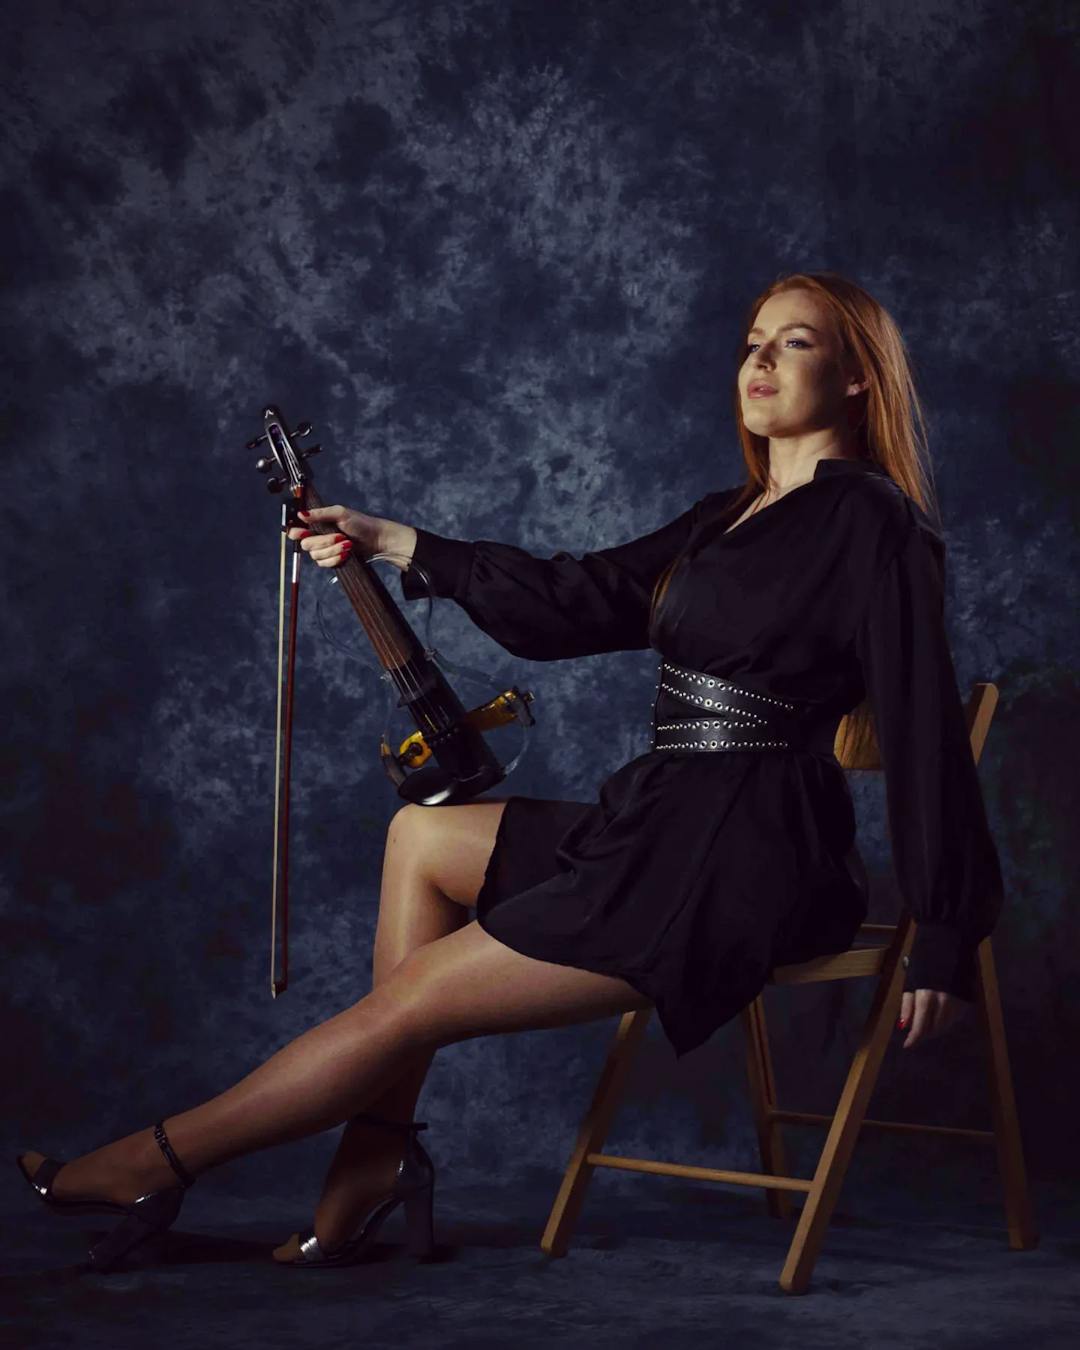 A woman poses with a violin in her hand sitting on a chair